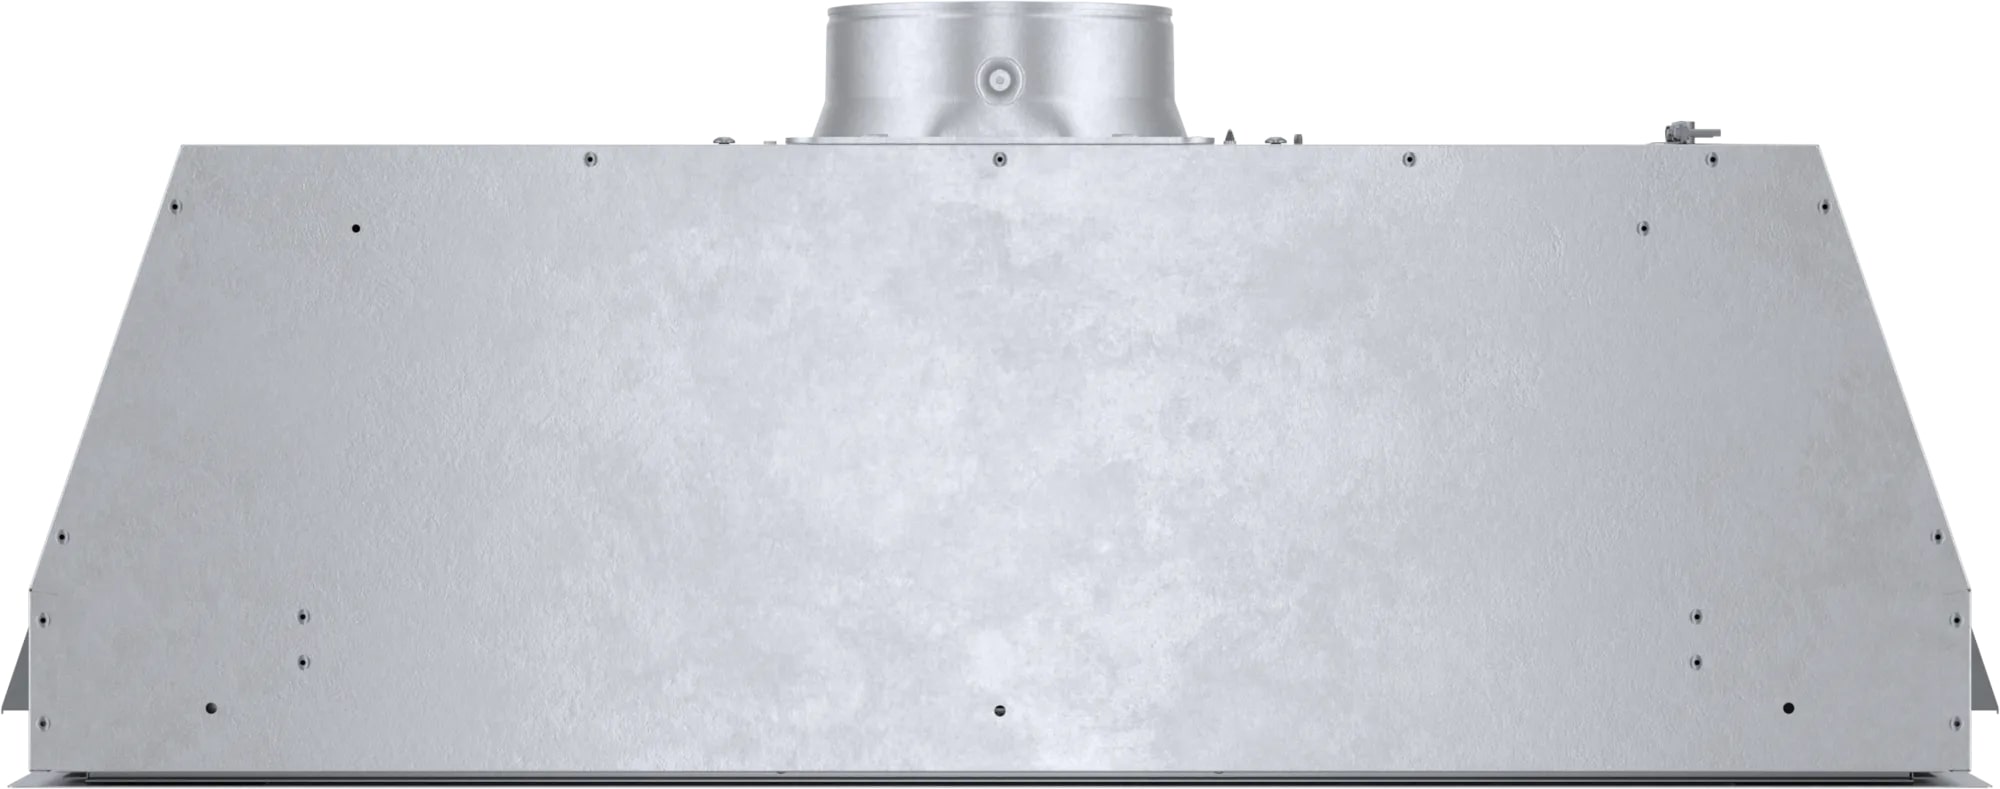 Bosch - 32.5 Inch 300 CFM Insert Vent in Stainless - HUI36253UC